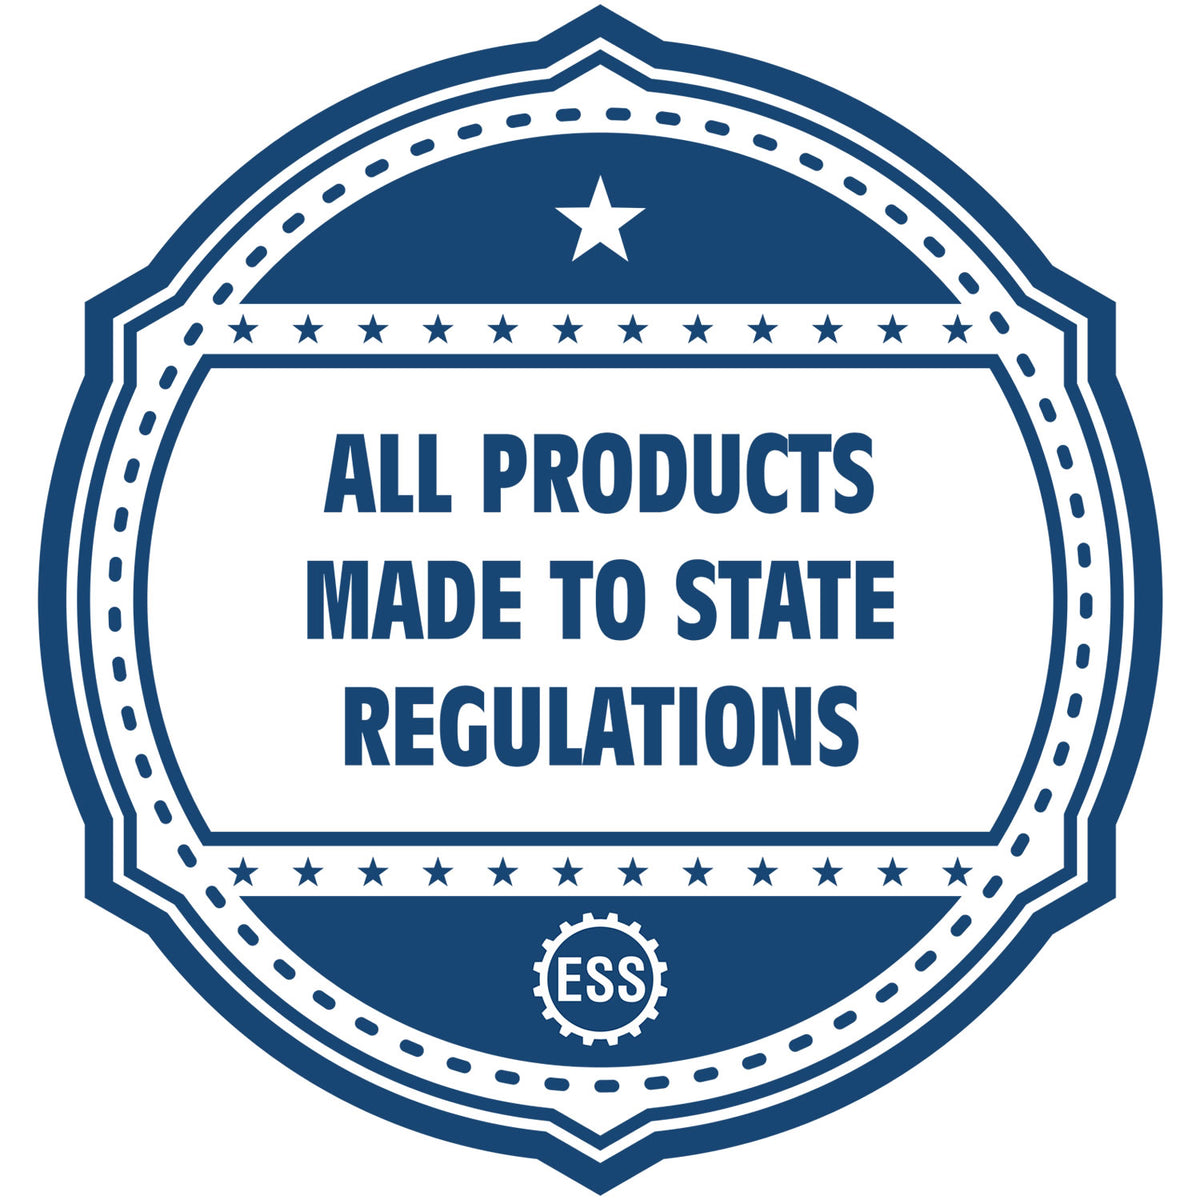 An icon or badge element for the Handheld Virginia Architect Seal Embosser showing that this product is made in compliance with state regulations.